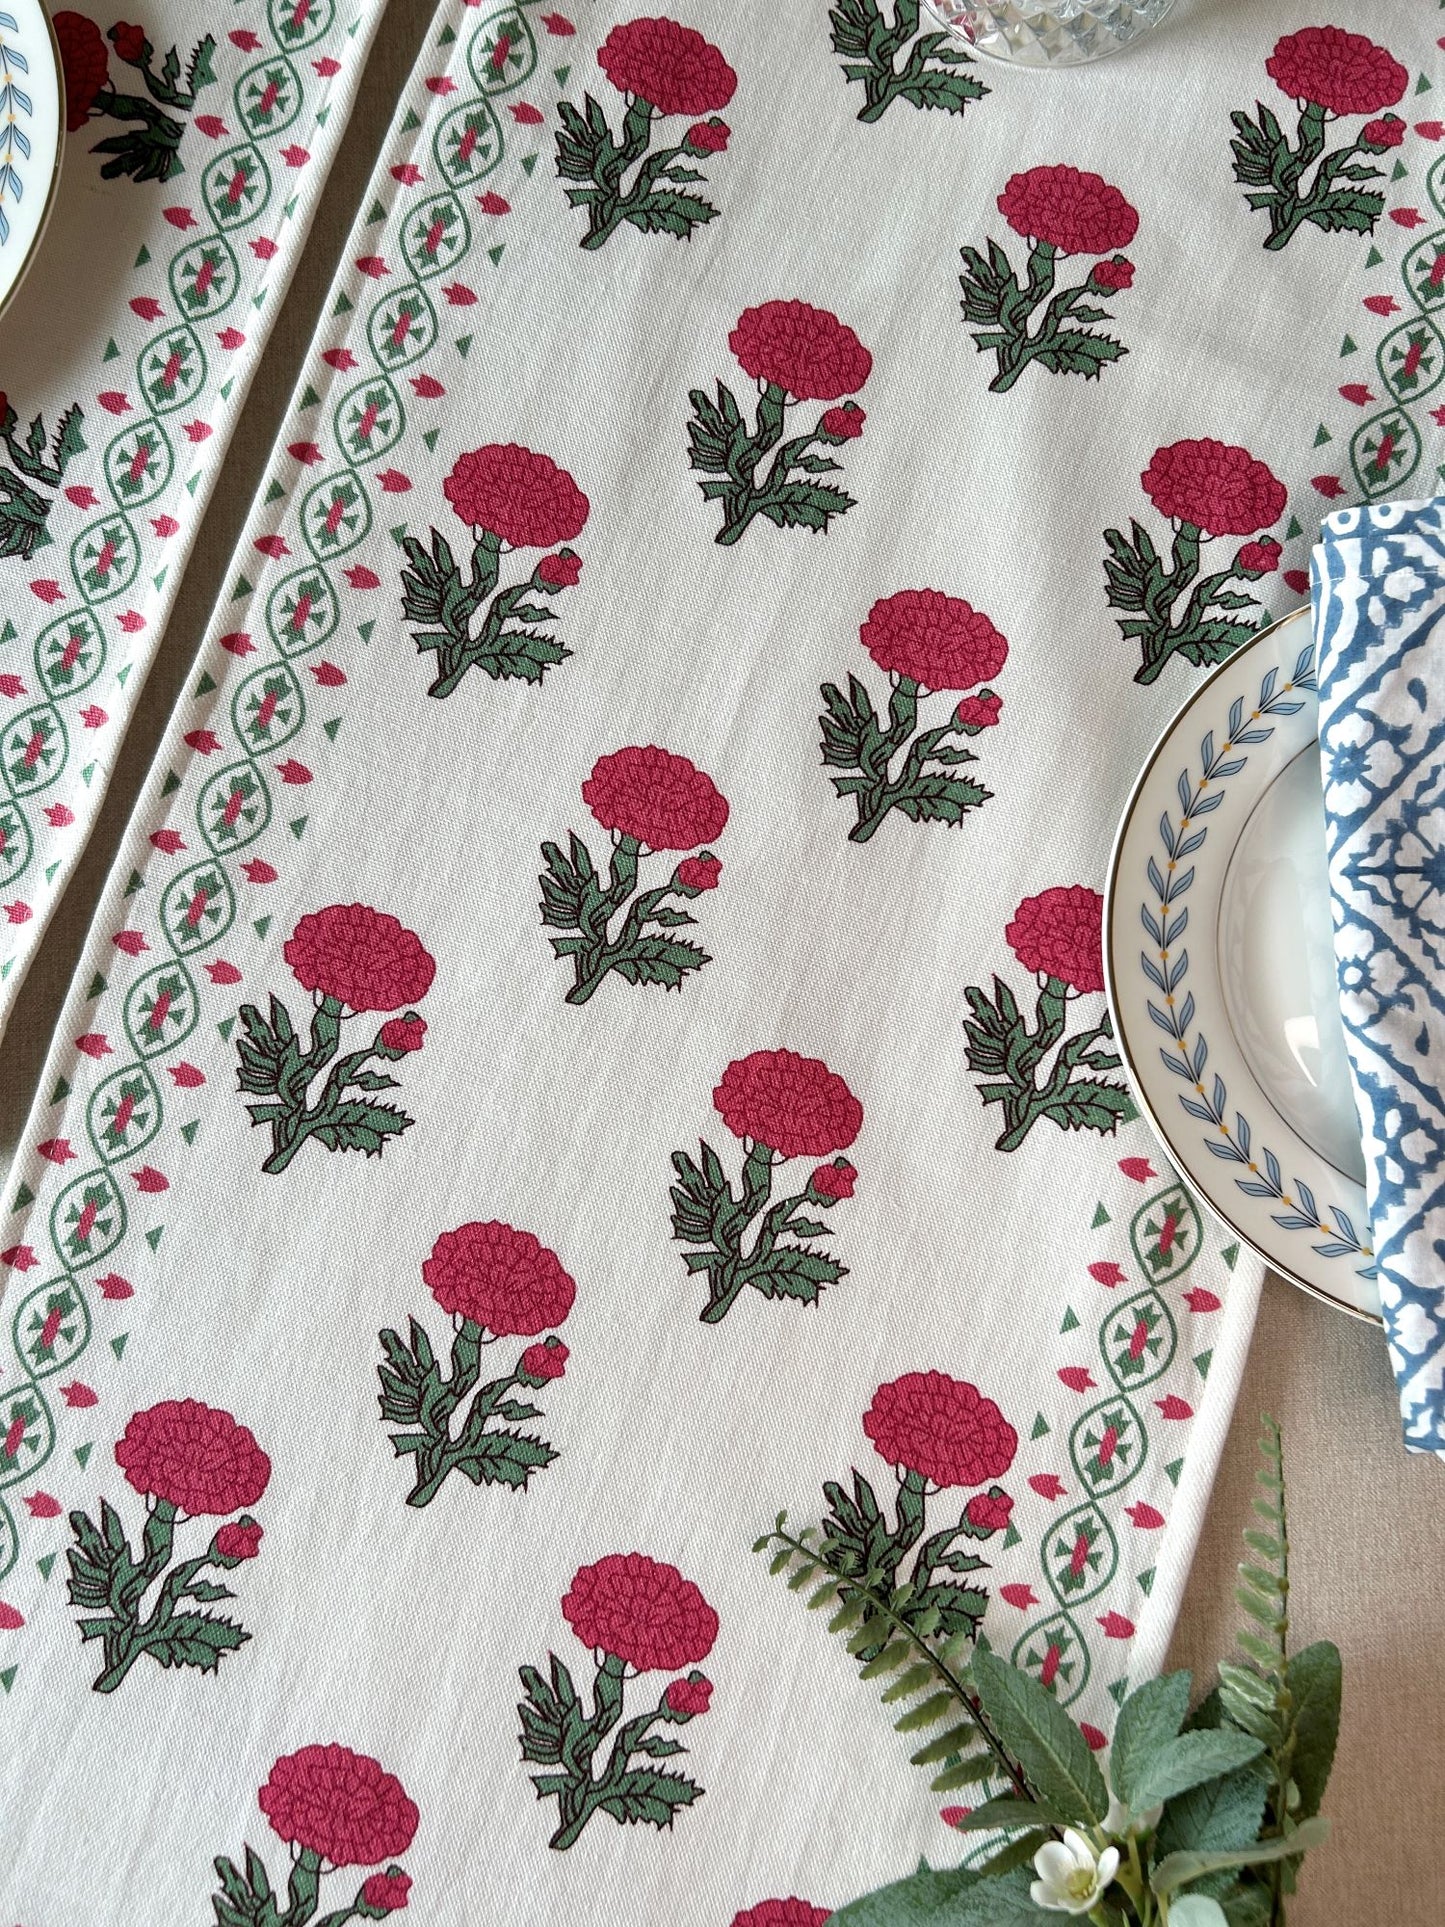 Red Blush Table Runner 14x72 Inches